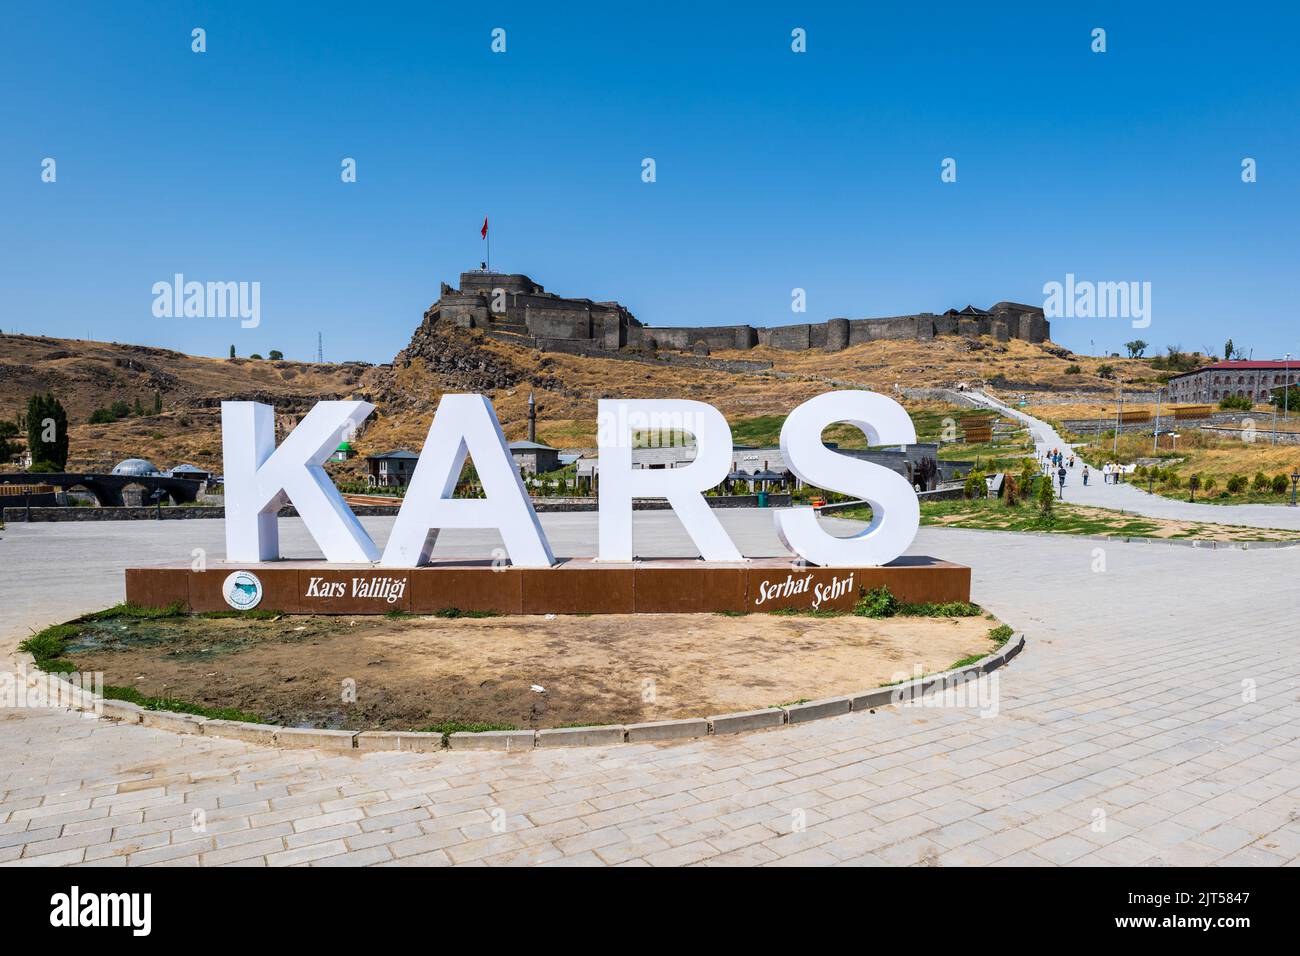 Kars, Turkey - August 2022: Kars Castle and monument for tourists in the center of Kars, Turkey. Stock Photo